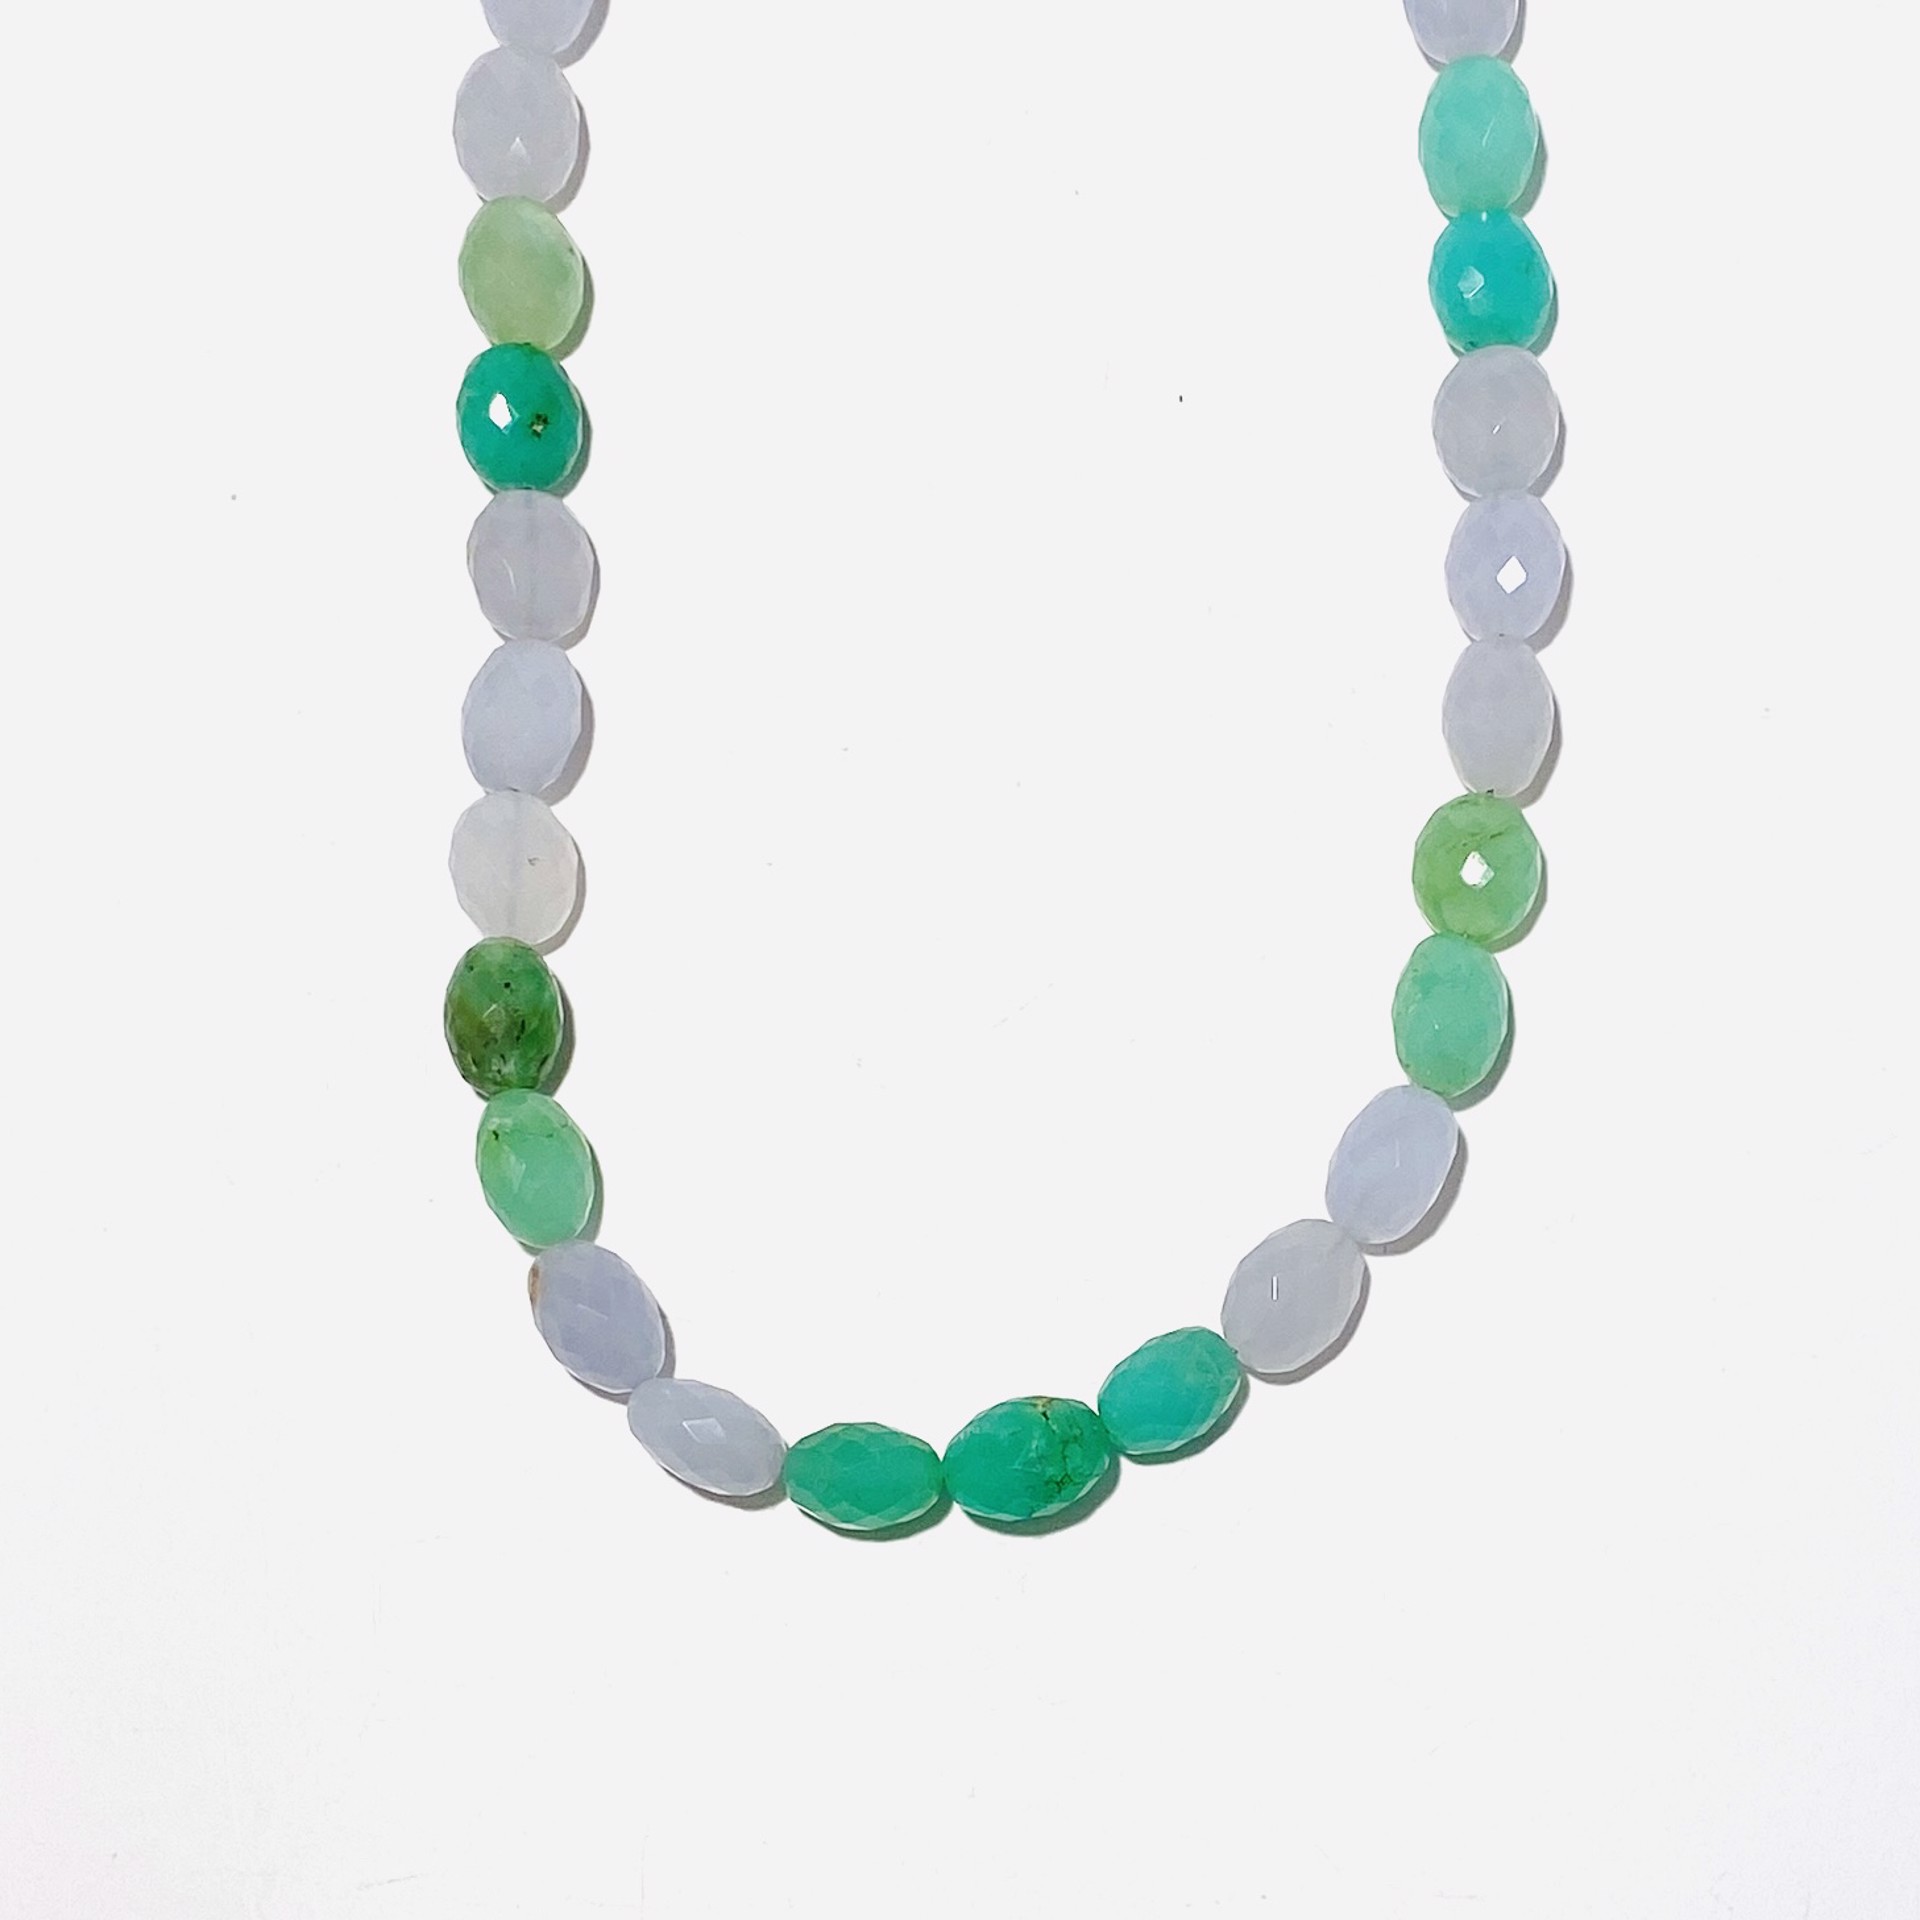 Oval Faceted Prehnite Strand Necklace NT23-22 by Nance Trueworthy